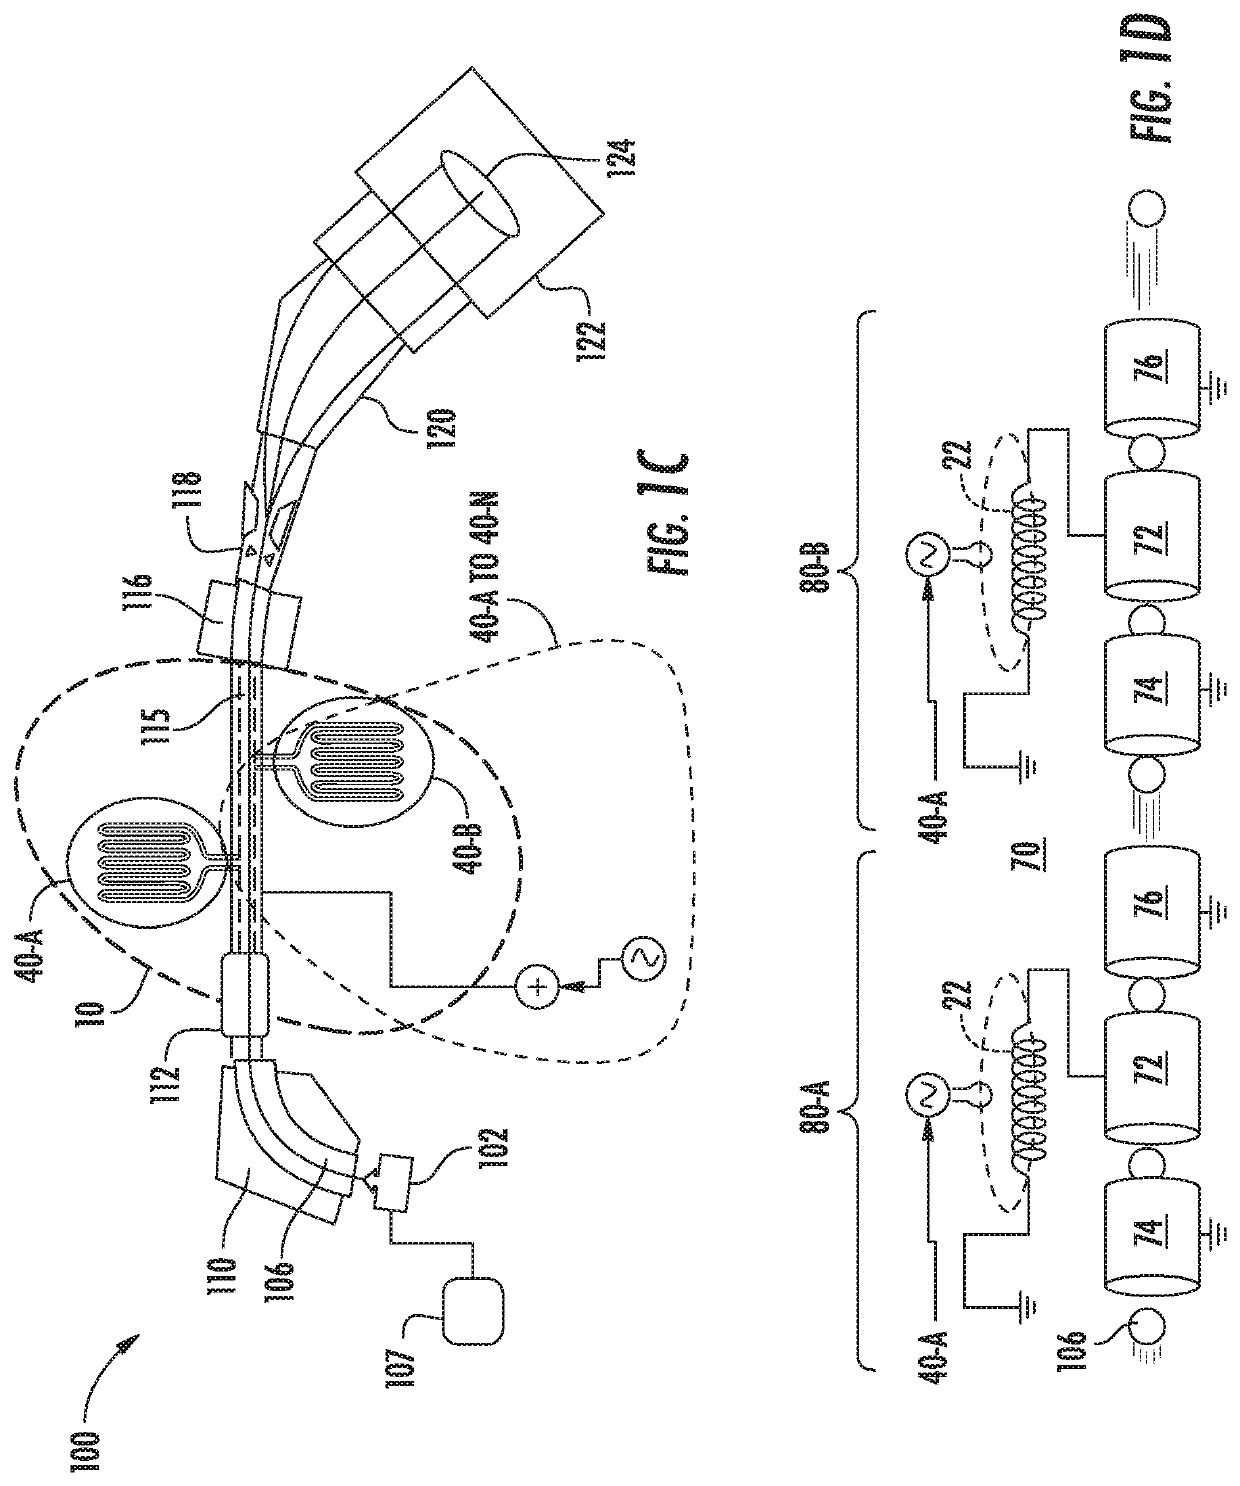 Ion implantation system and linear accelerator having novel accelerator stage configuration